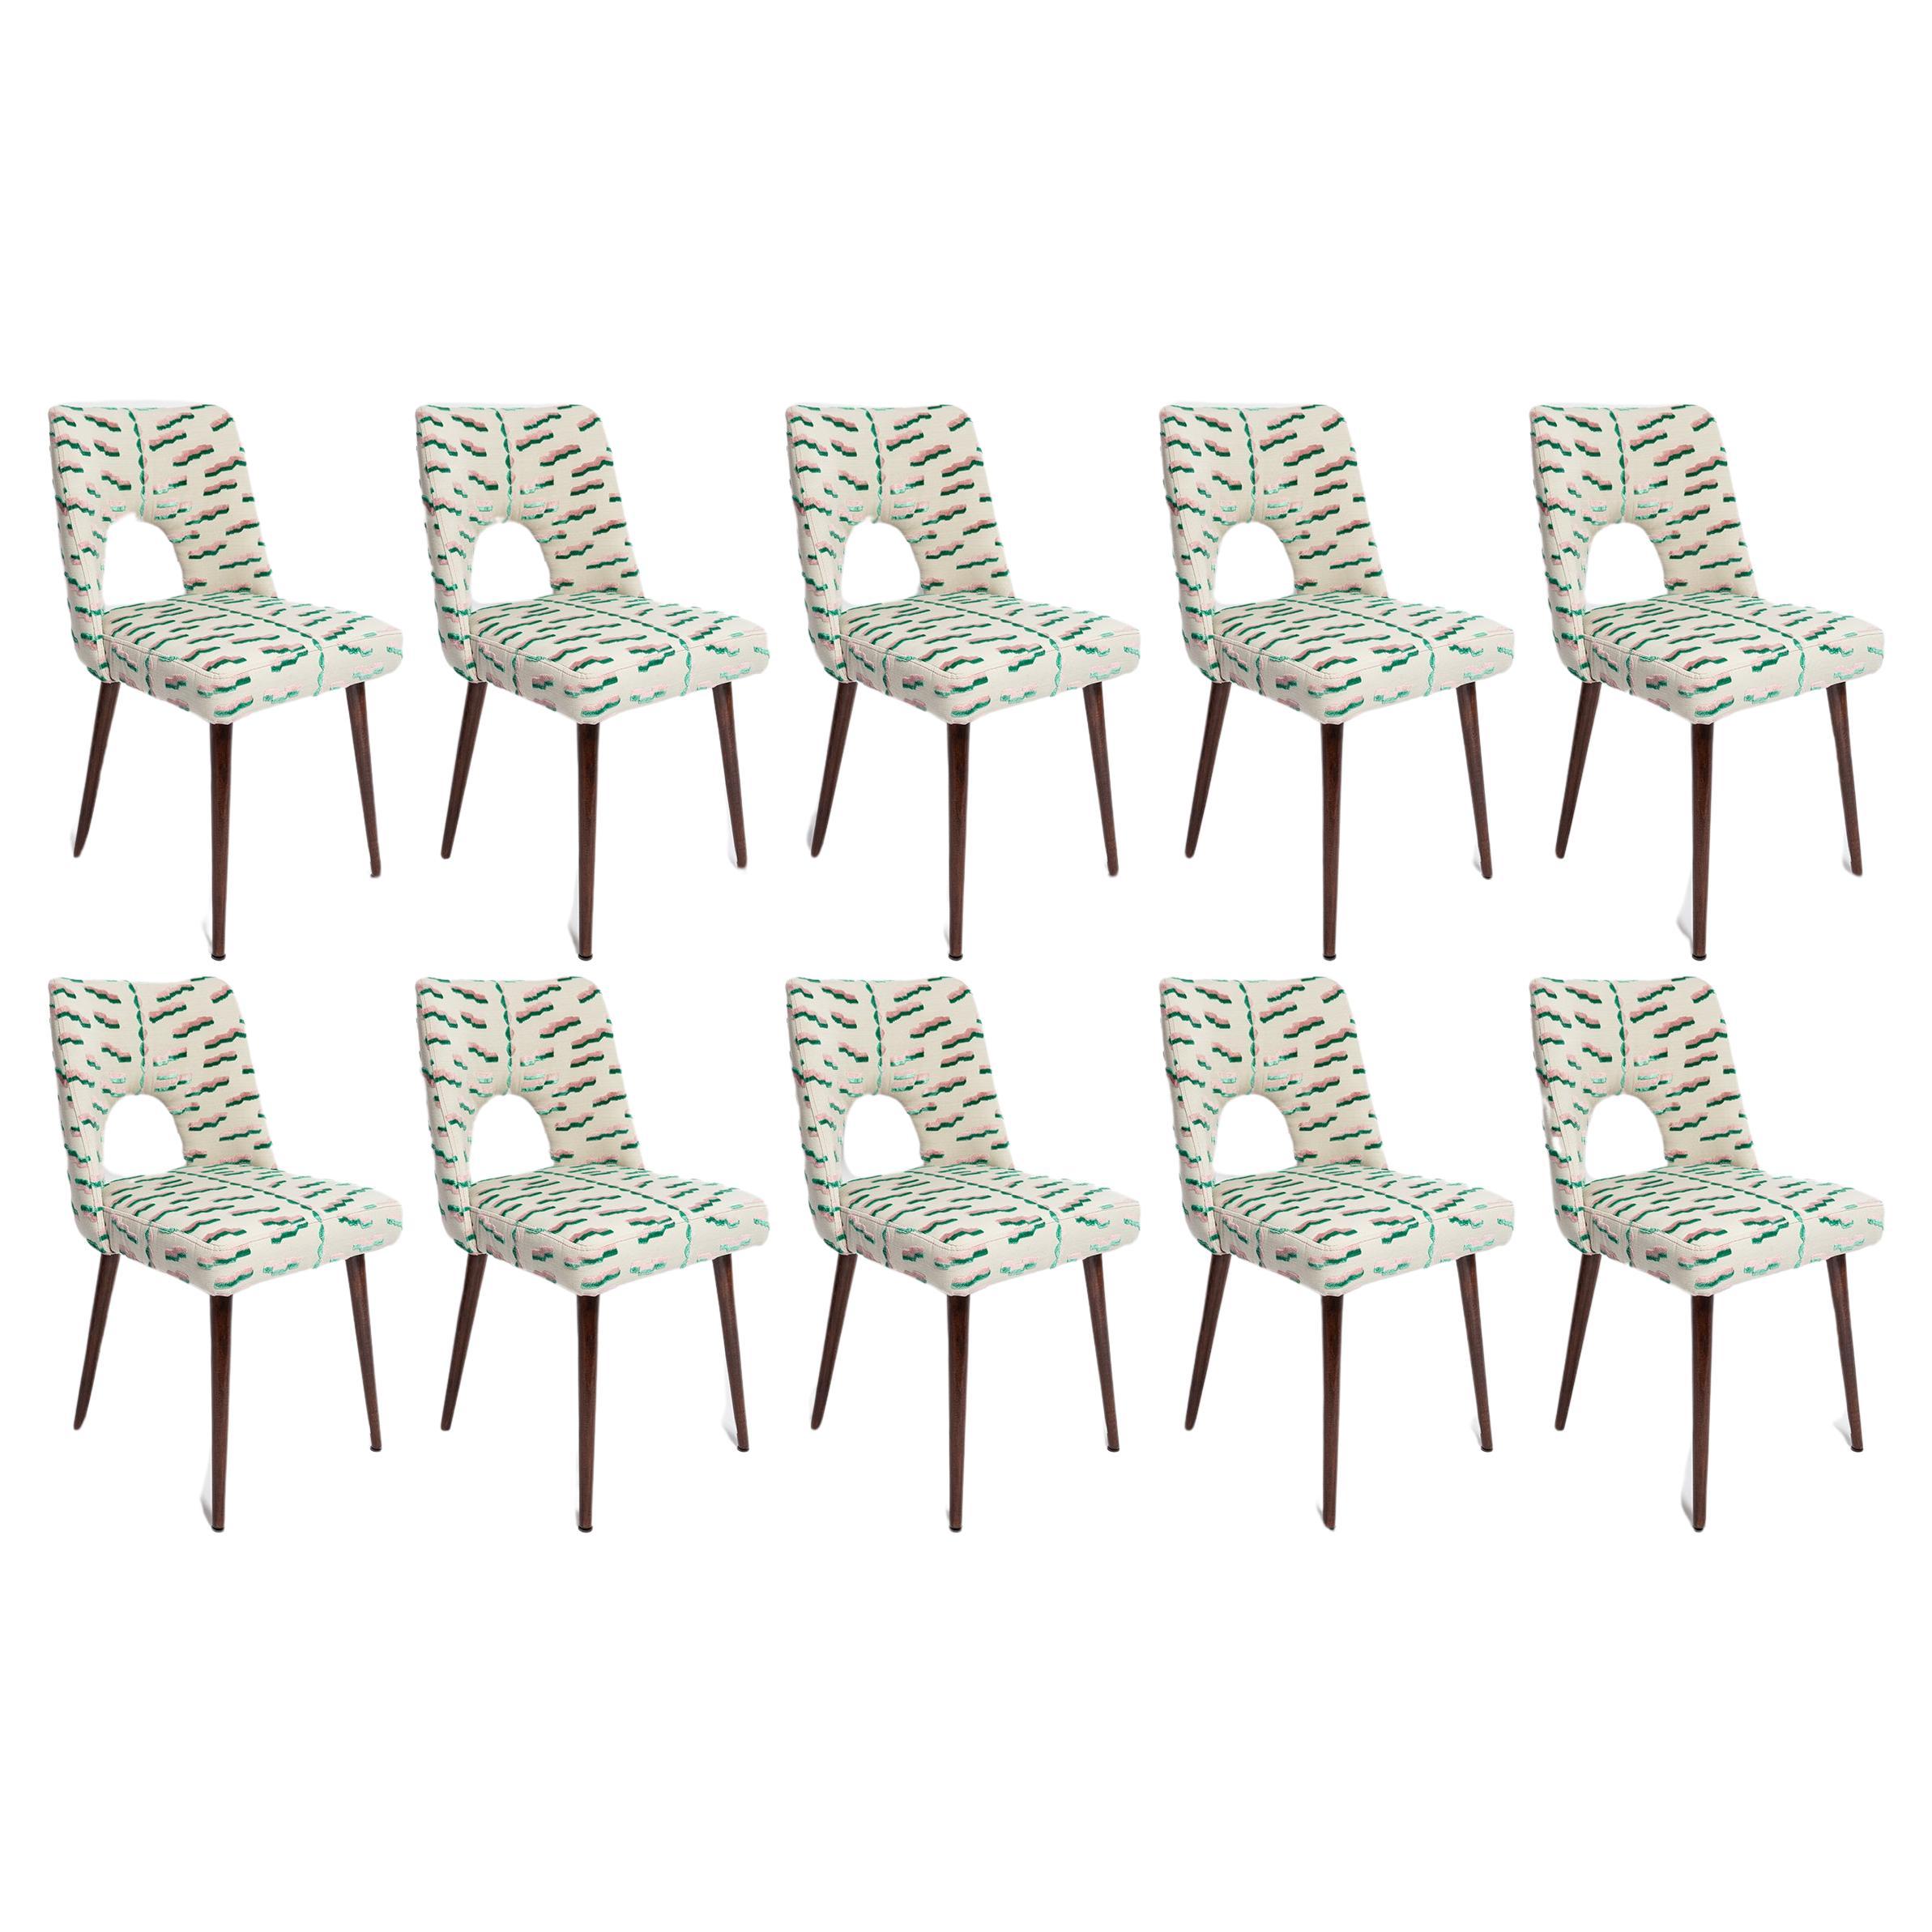 Set of Ten Mid Century Tiger Beat Jacquard Velvet Shell Chairs, Europe, 1960s For Sale